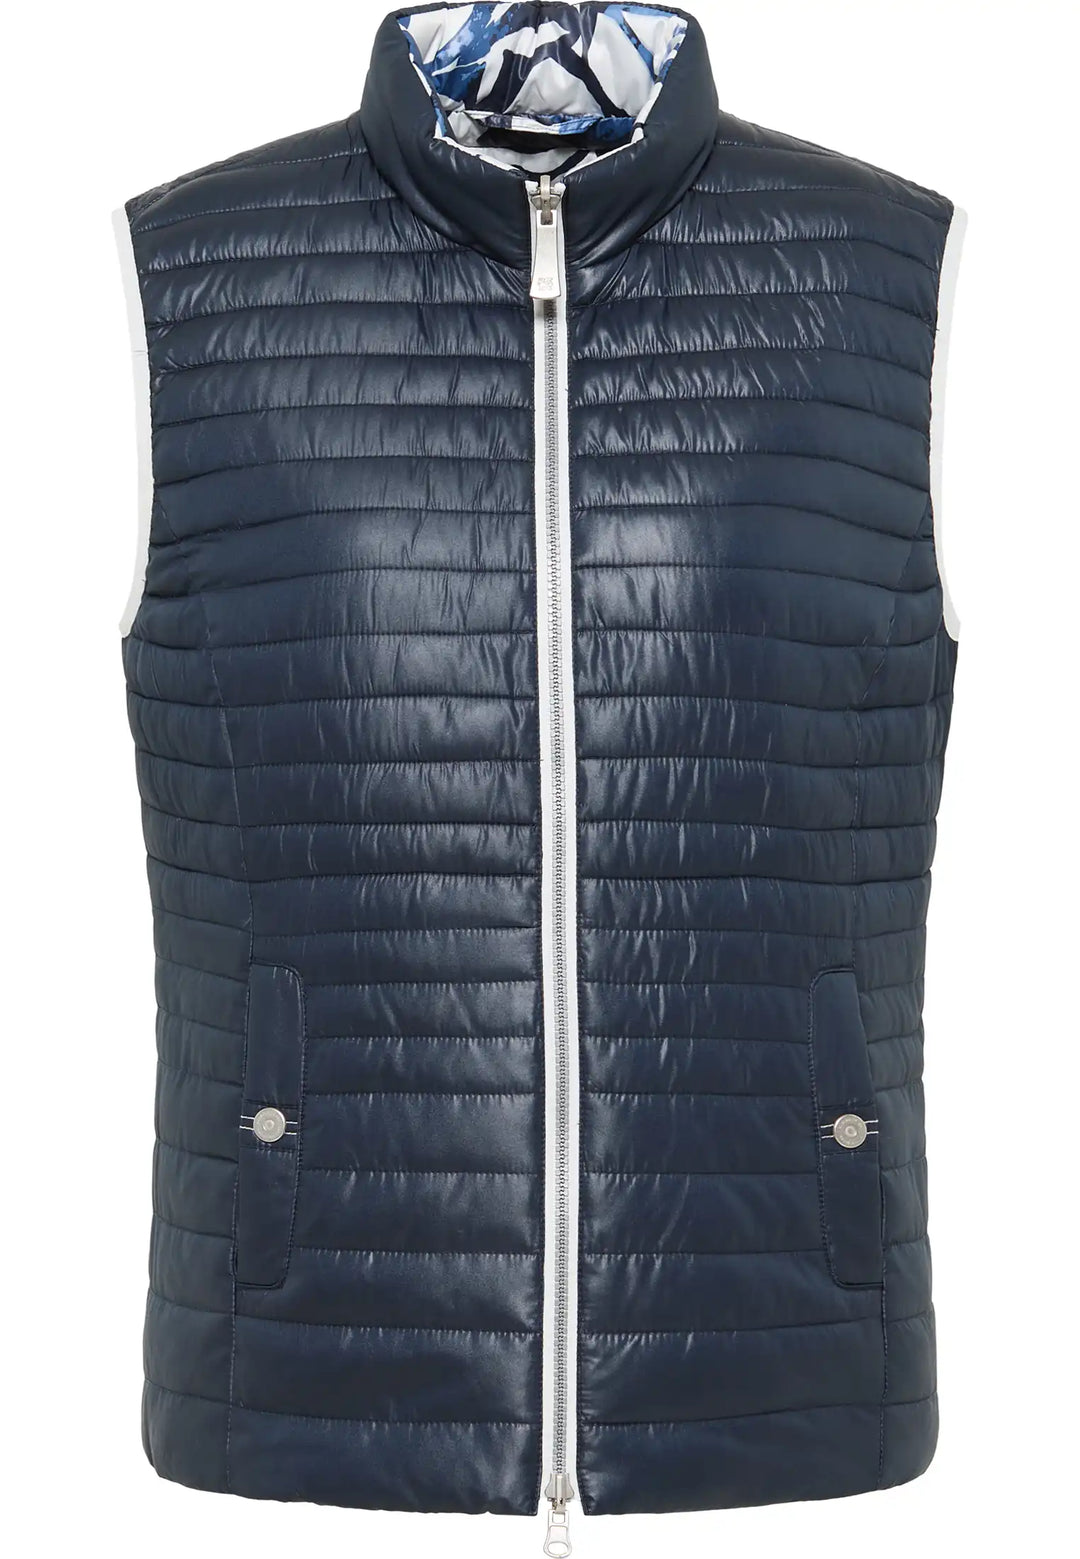 Chic reversible gilet in navy with a high collar and patterned interior for a stylish, adaptable wardrobe piece, style 55500042-860